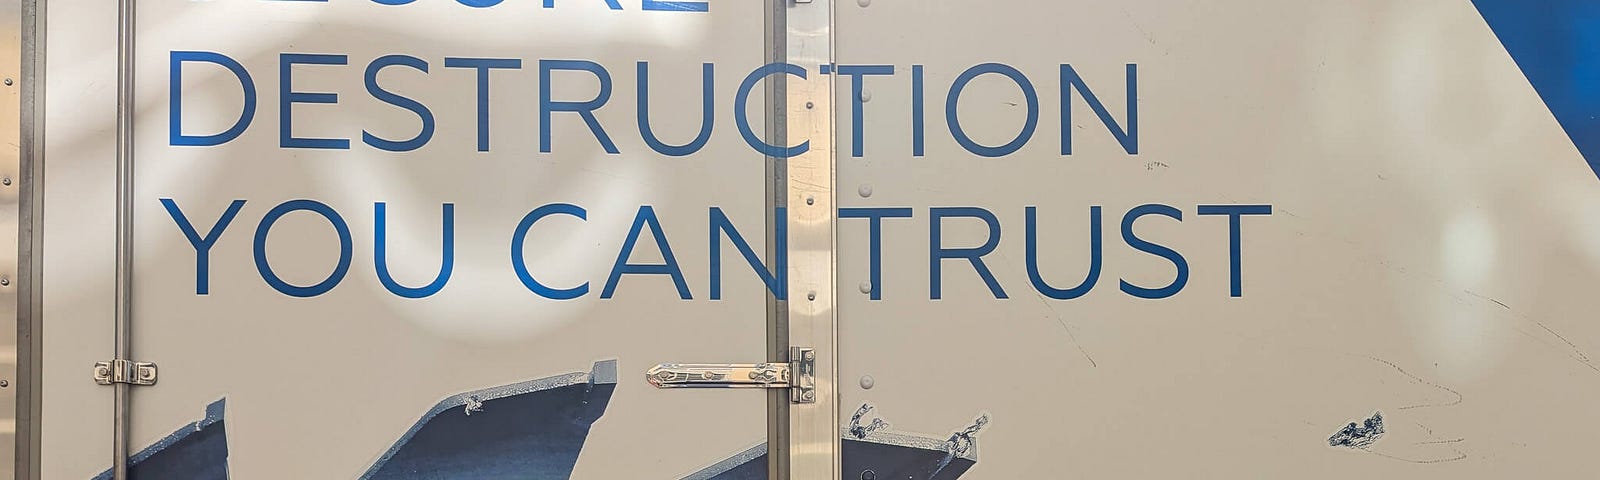 Truck panel reading “Secure Destruction You Can Trust” above a saw blade